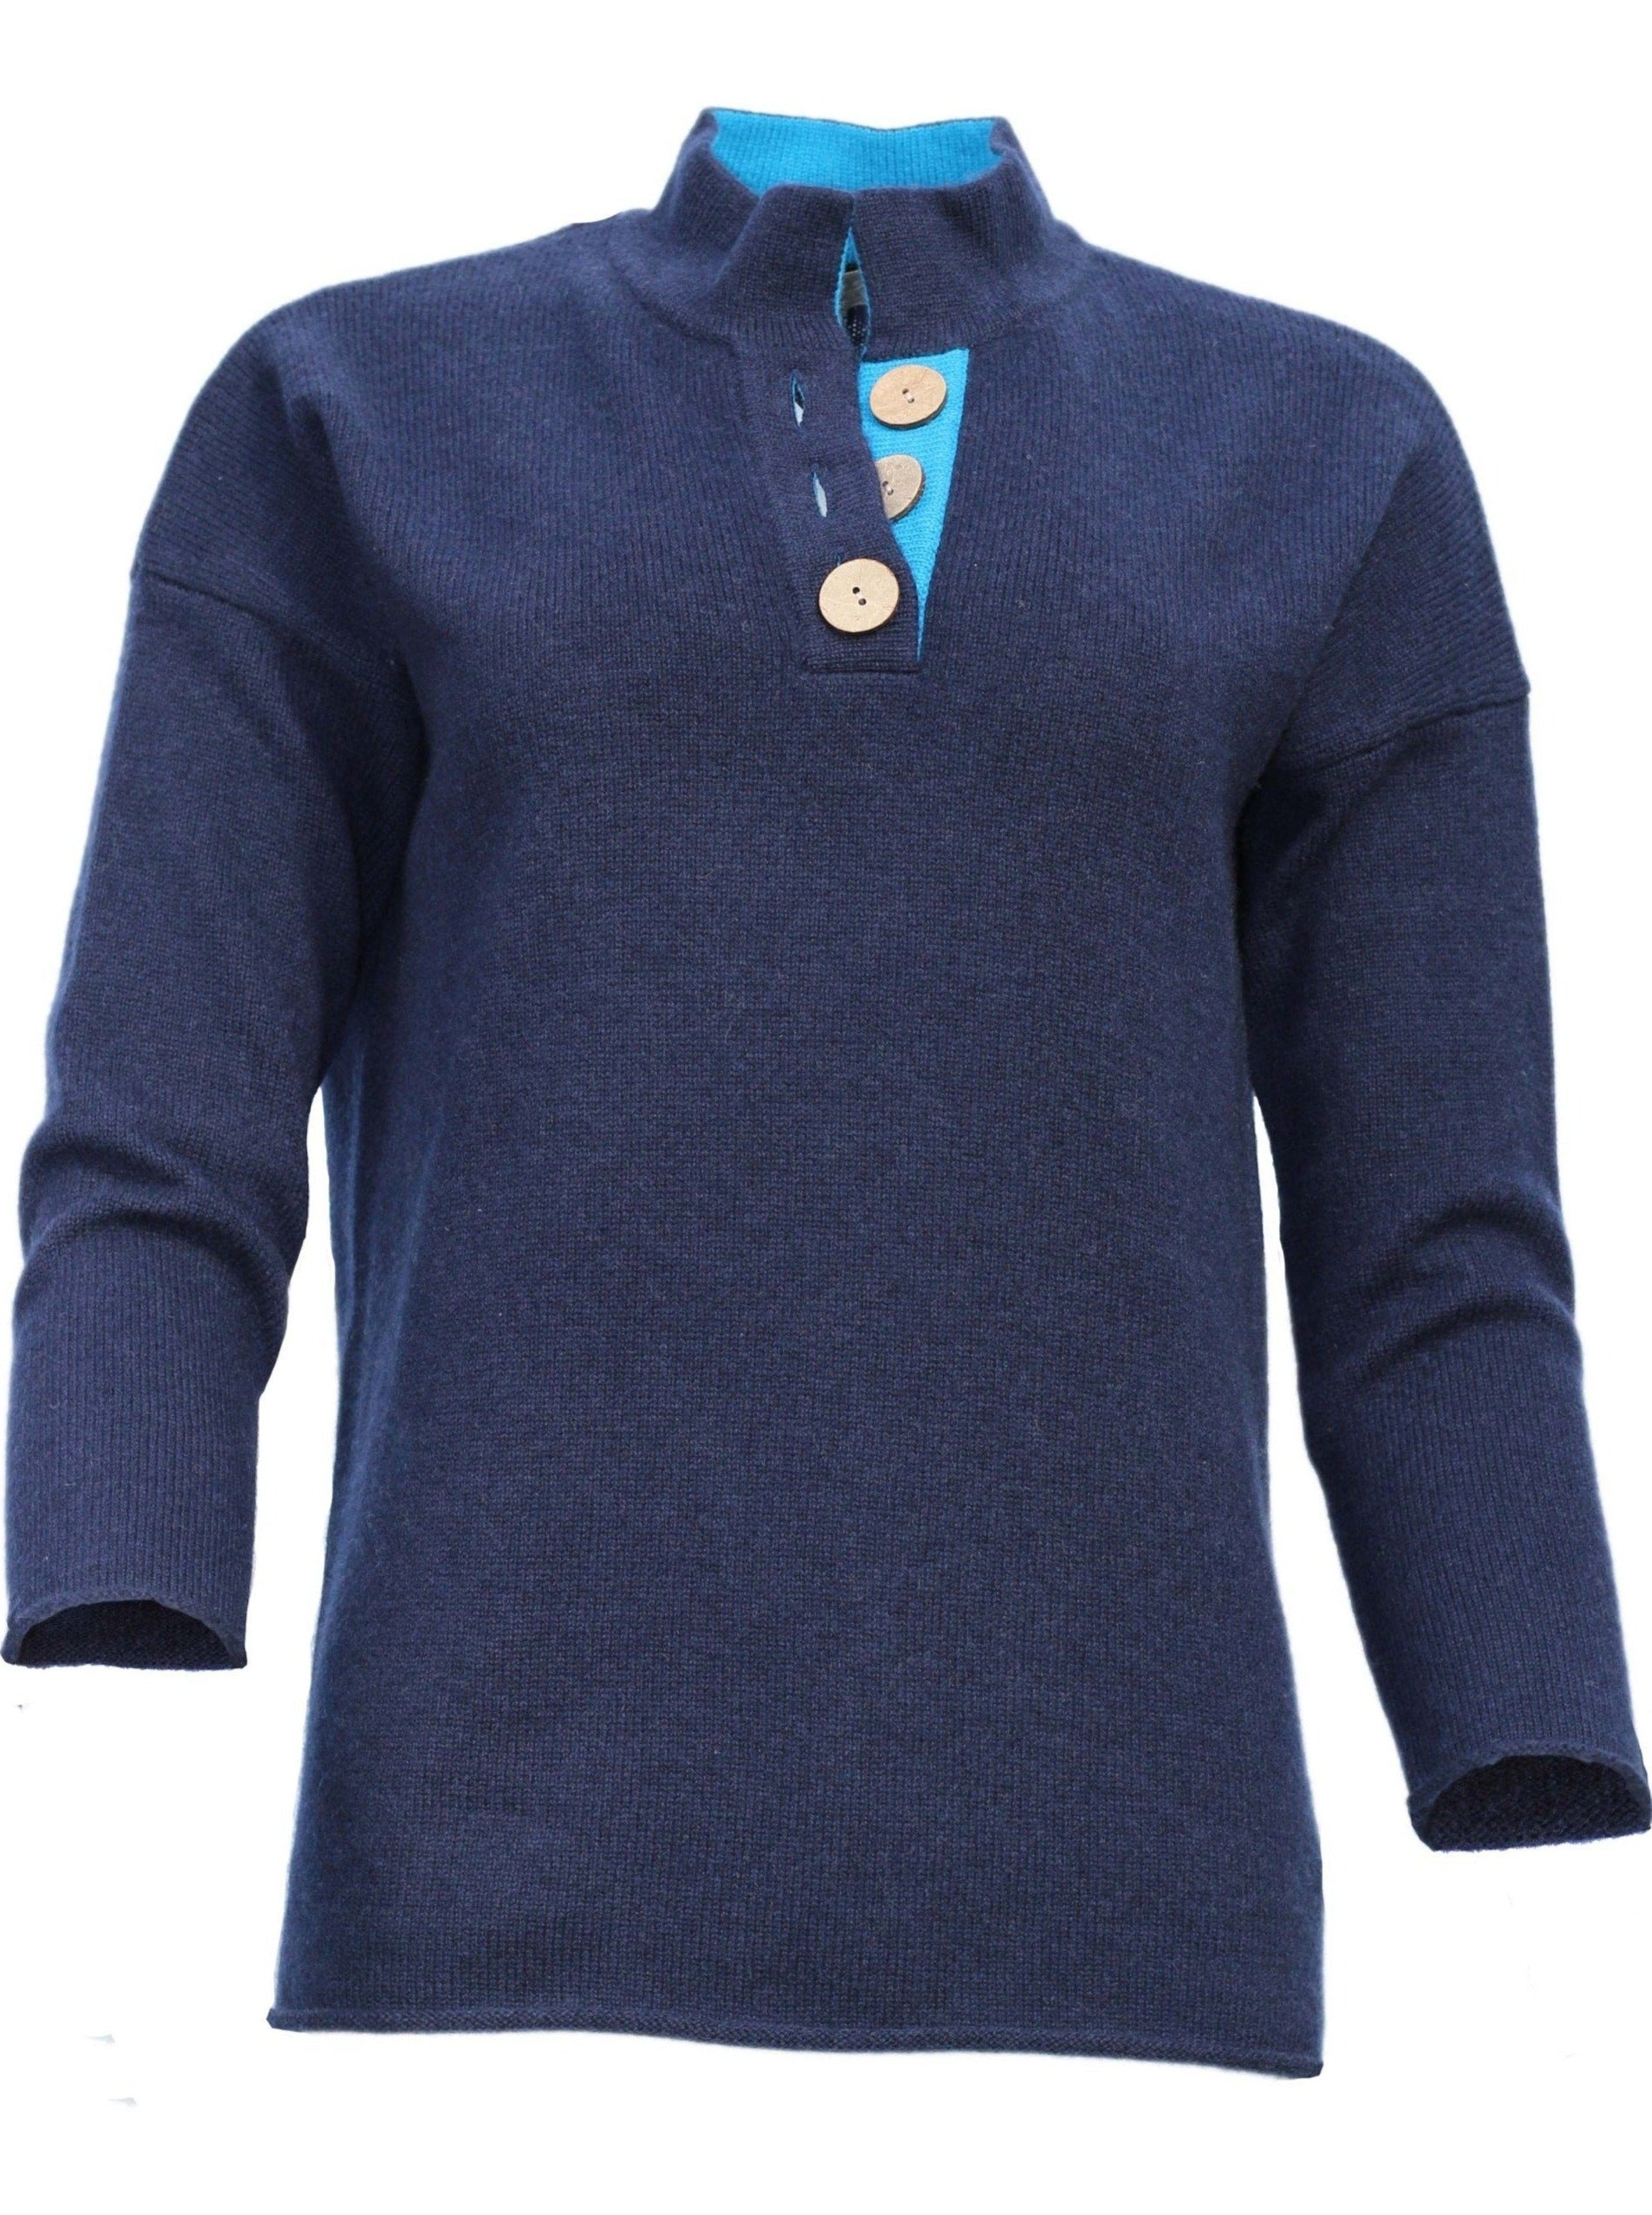 Cashmere & Merino High Collar Jumper in Navy and Turquoise